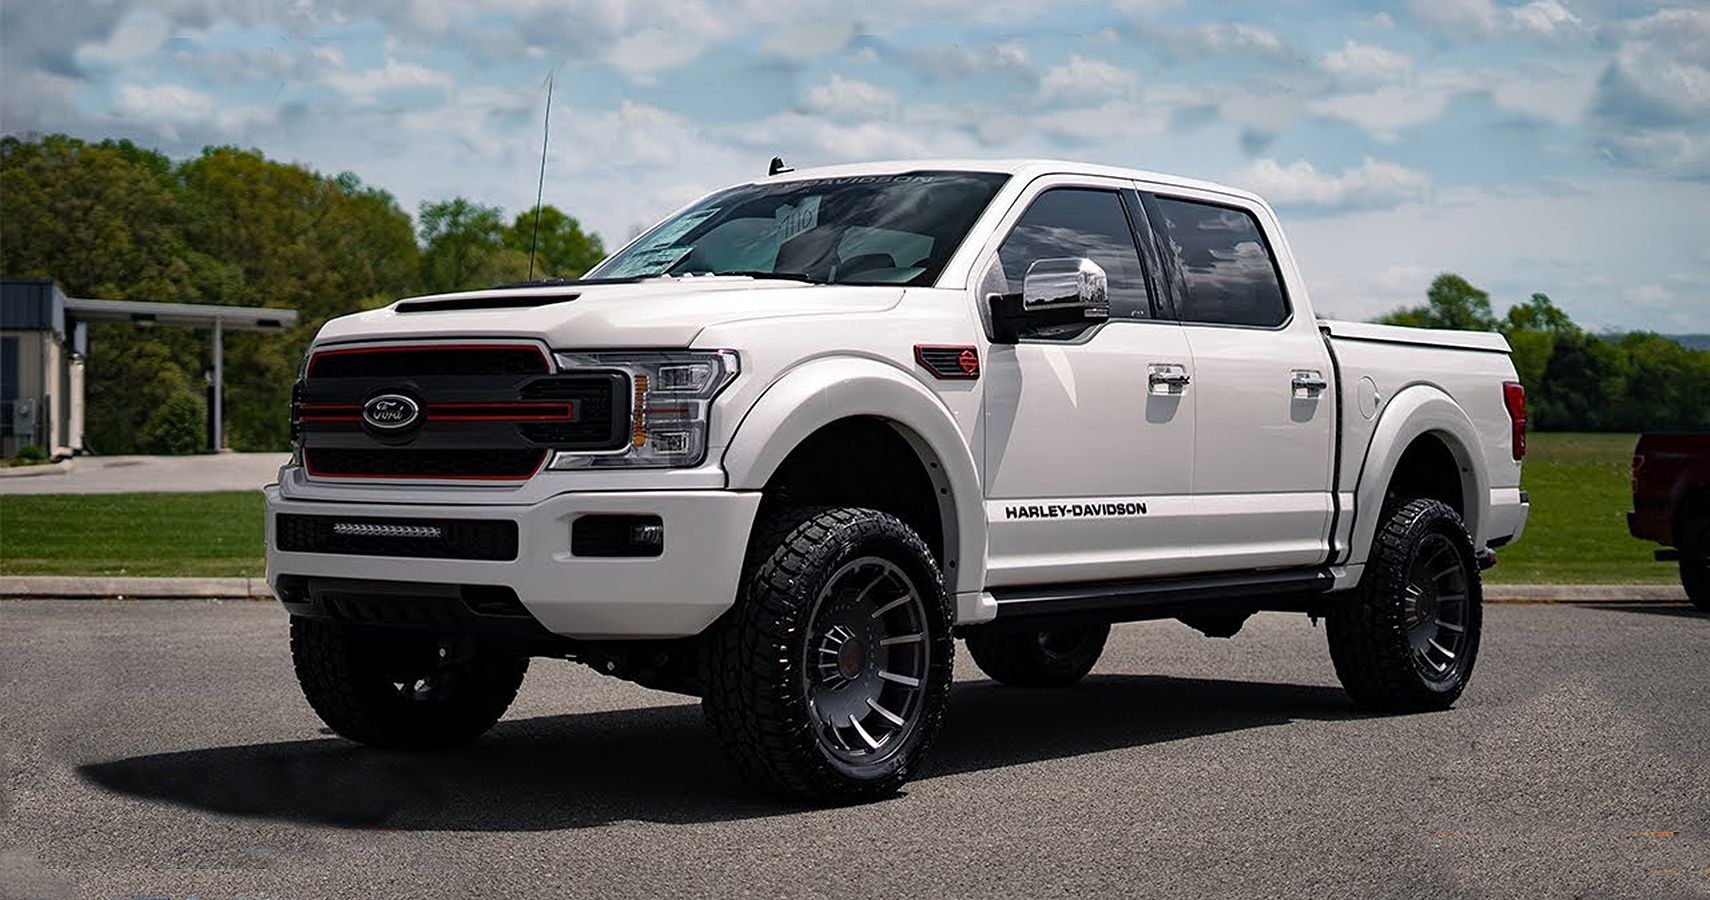 Supercharged Custom 2019 Ford F-150: It’s A Harley-Davidson